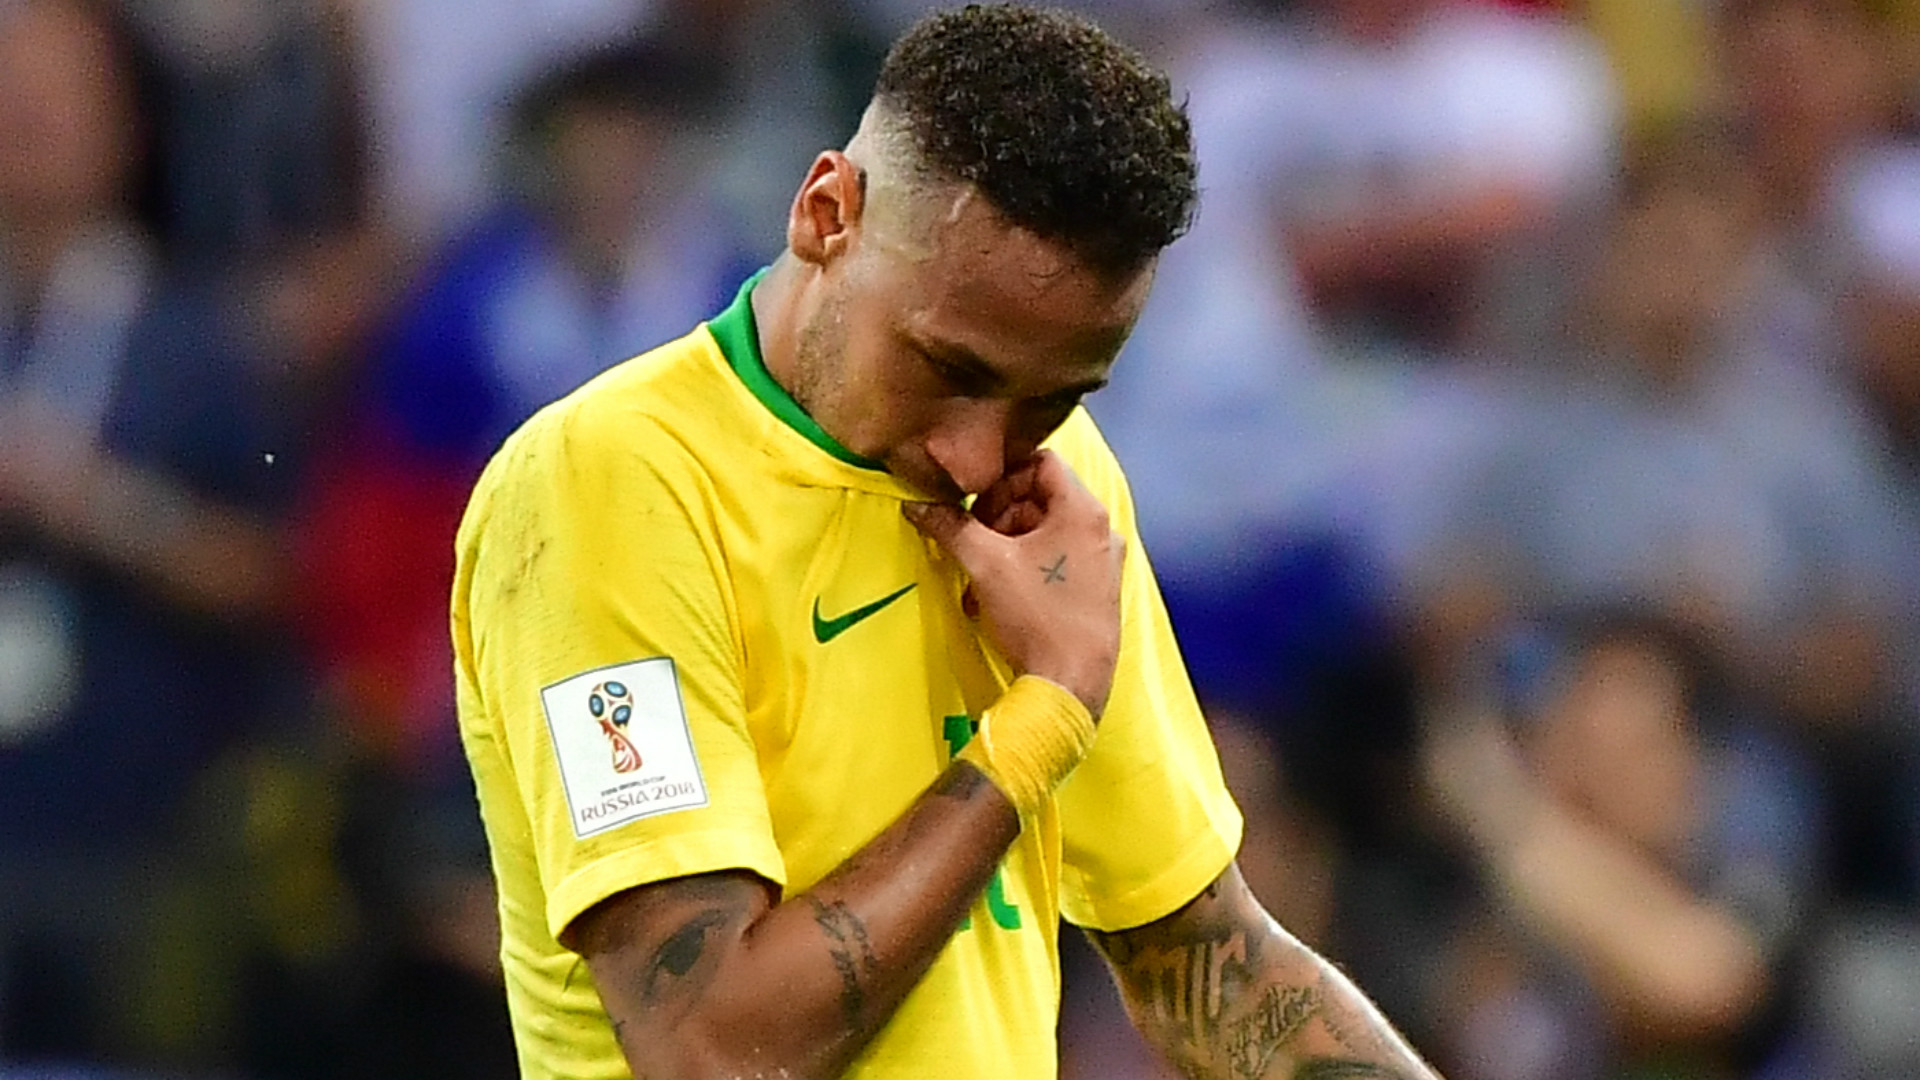 Brazil knocked out: Neymar struggling to 'find the strength to play again' after saddest moment of his career at World Cup 2018